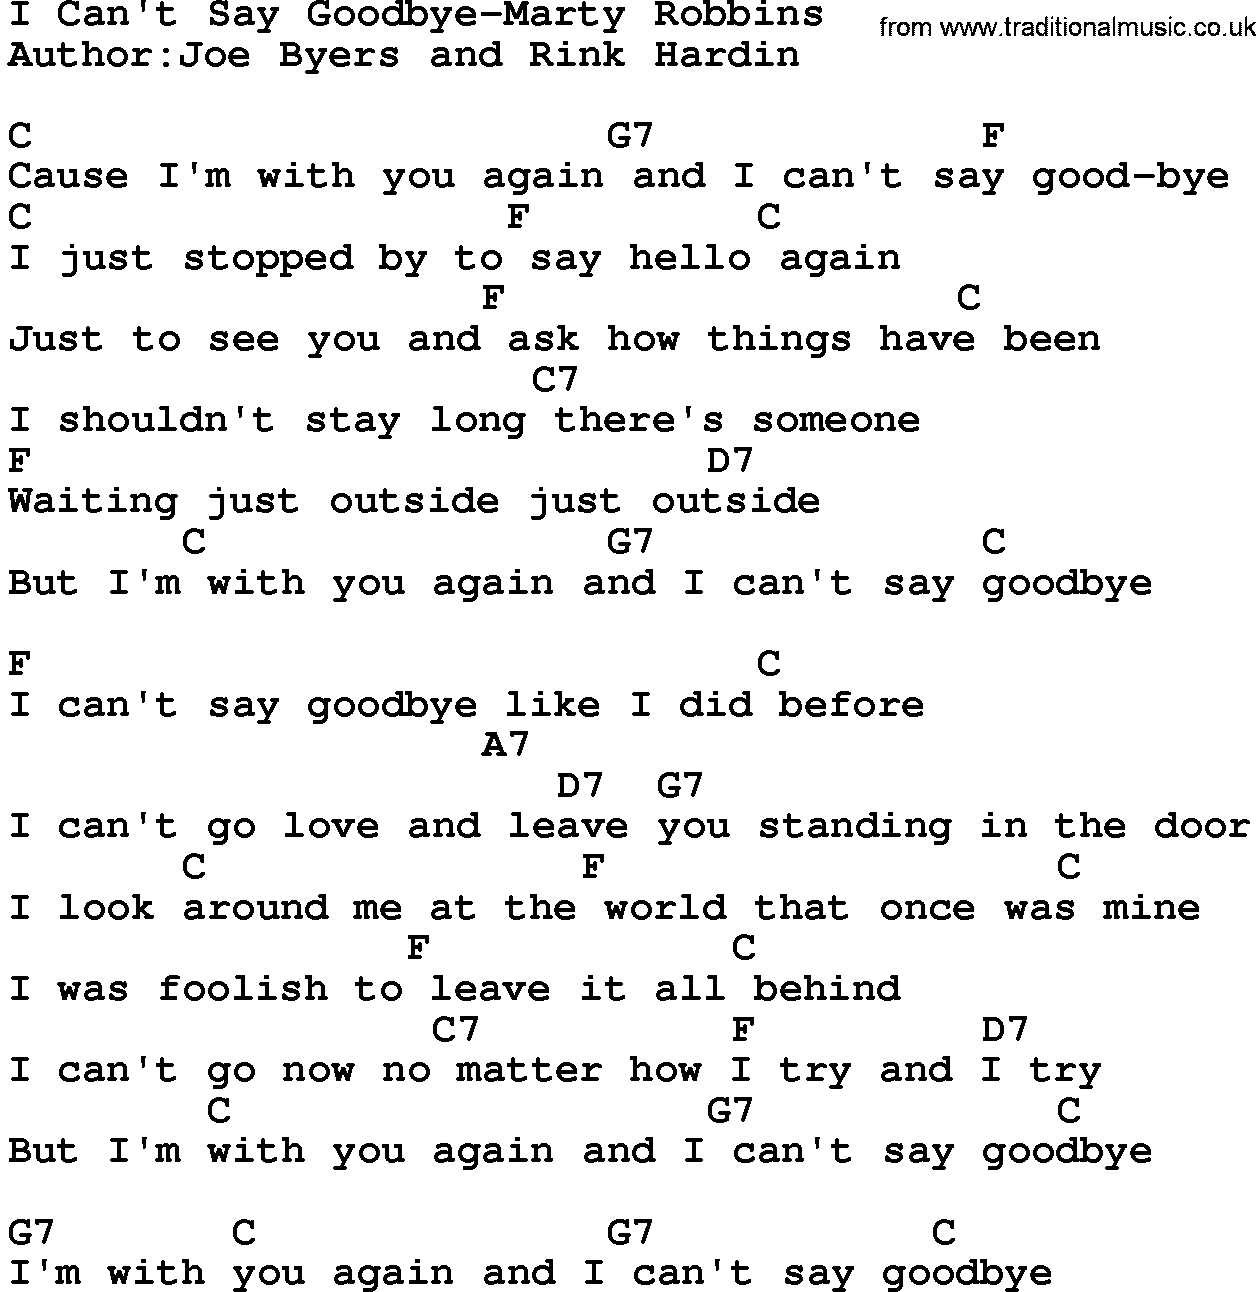 Country music song: I Can't Say Goodbye-Marty Robbins lyrics and chords